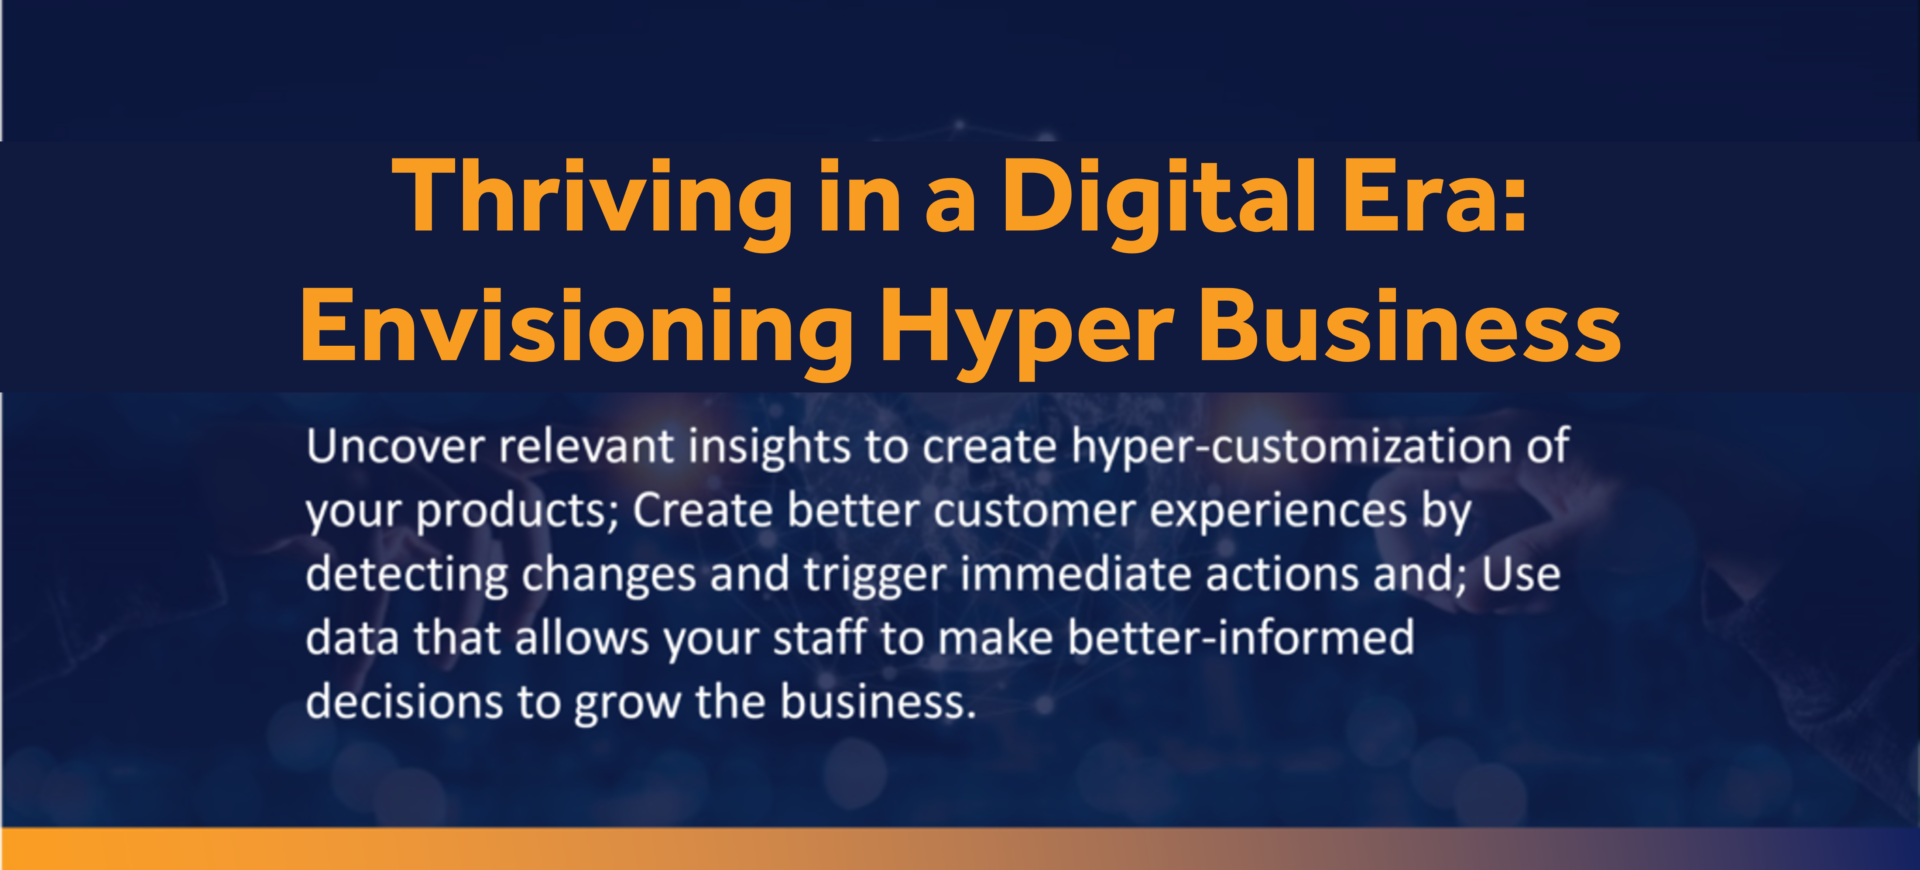 Thriving in a Digital Era: Envisioning Hyper Business